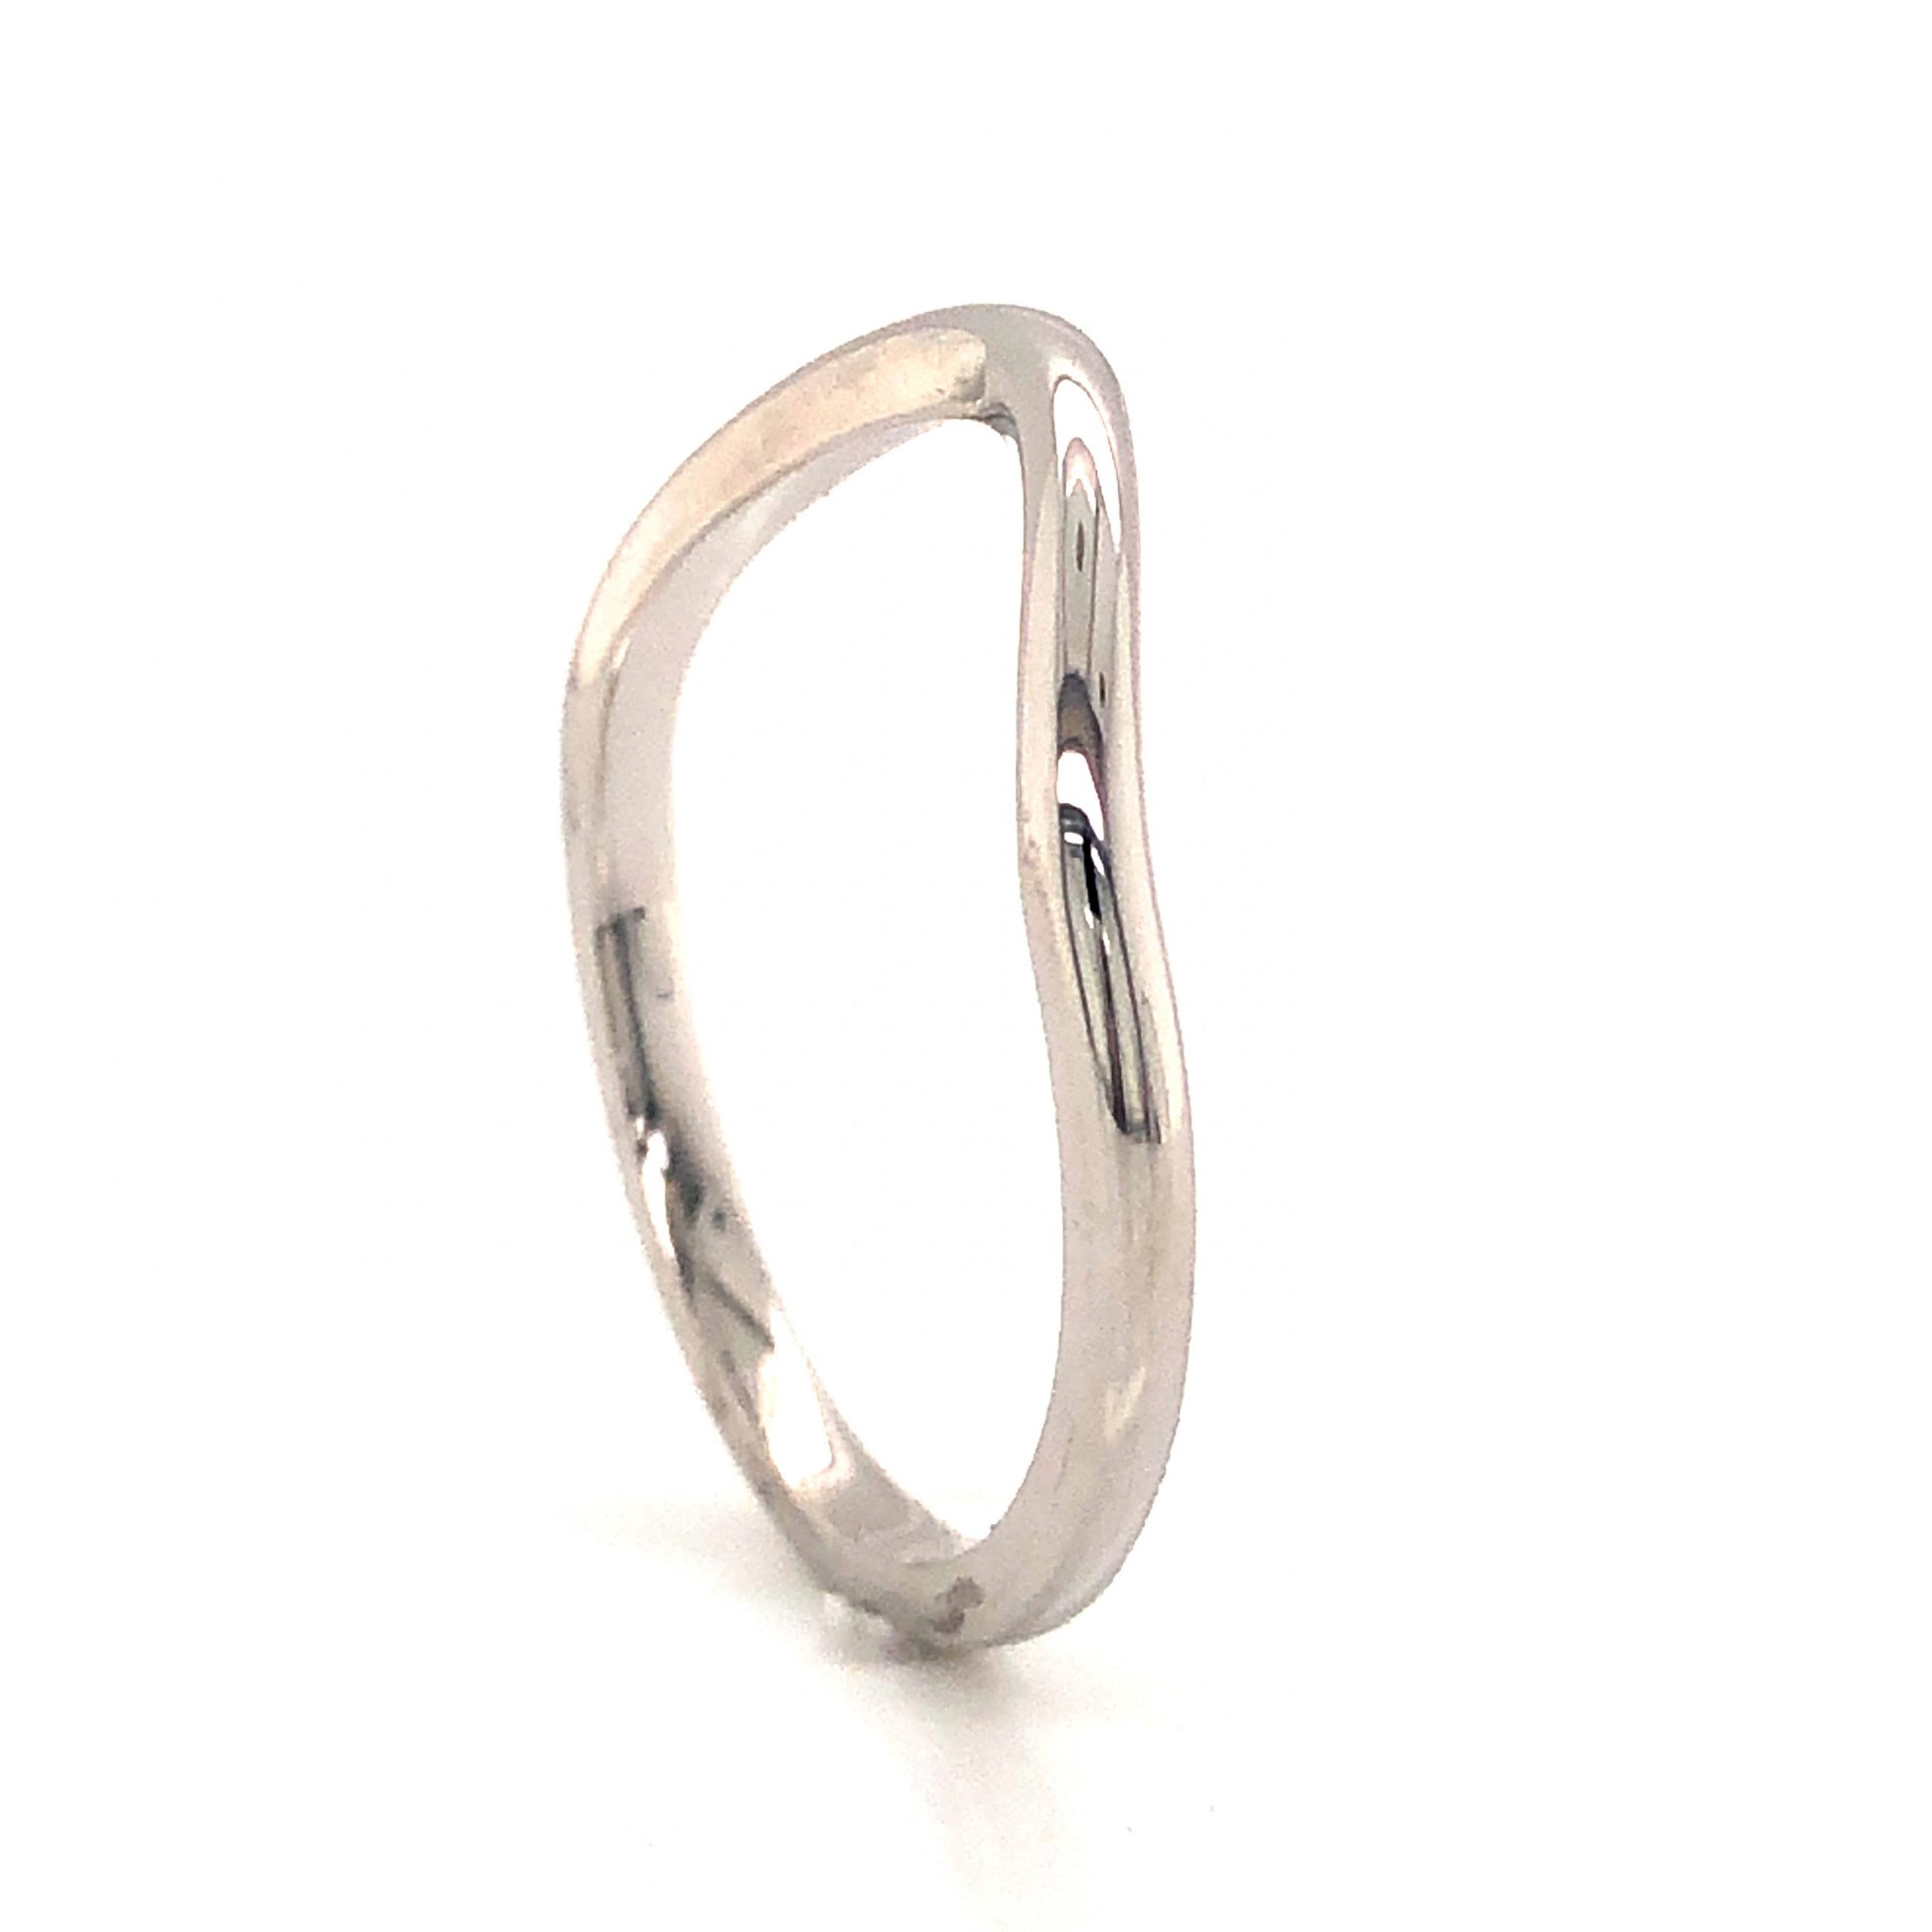 Thin Round Curved Wedding Band in 14k White GoldComposition: 14 Karat White GoldRing Size: 7Total Gram Weight: 2.2 gInscription: 14k